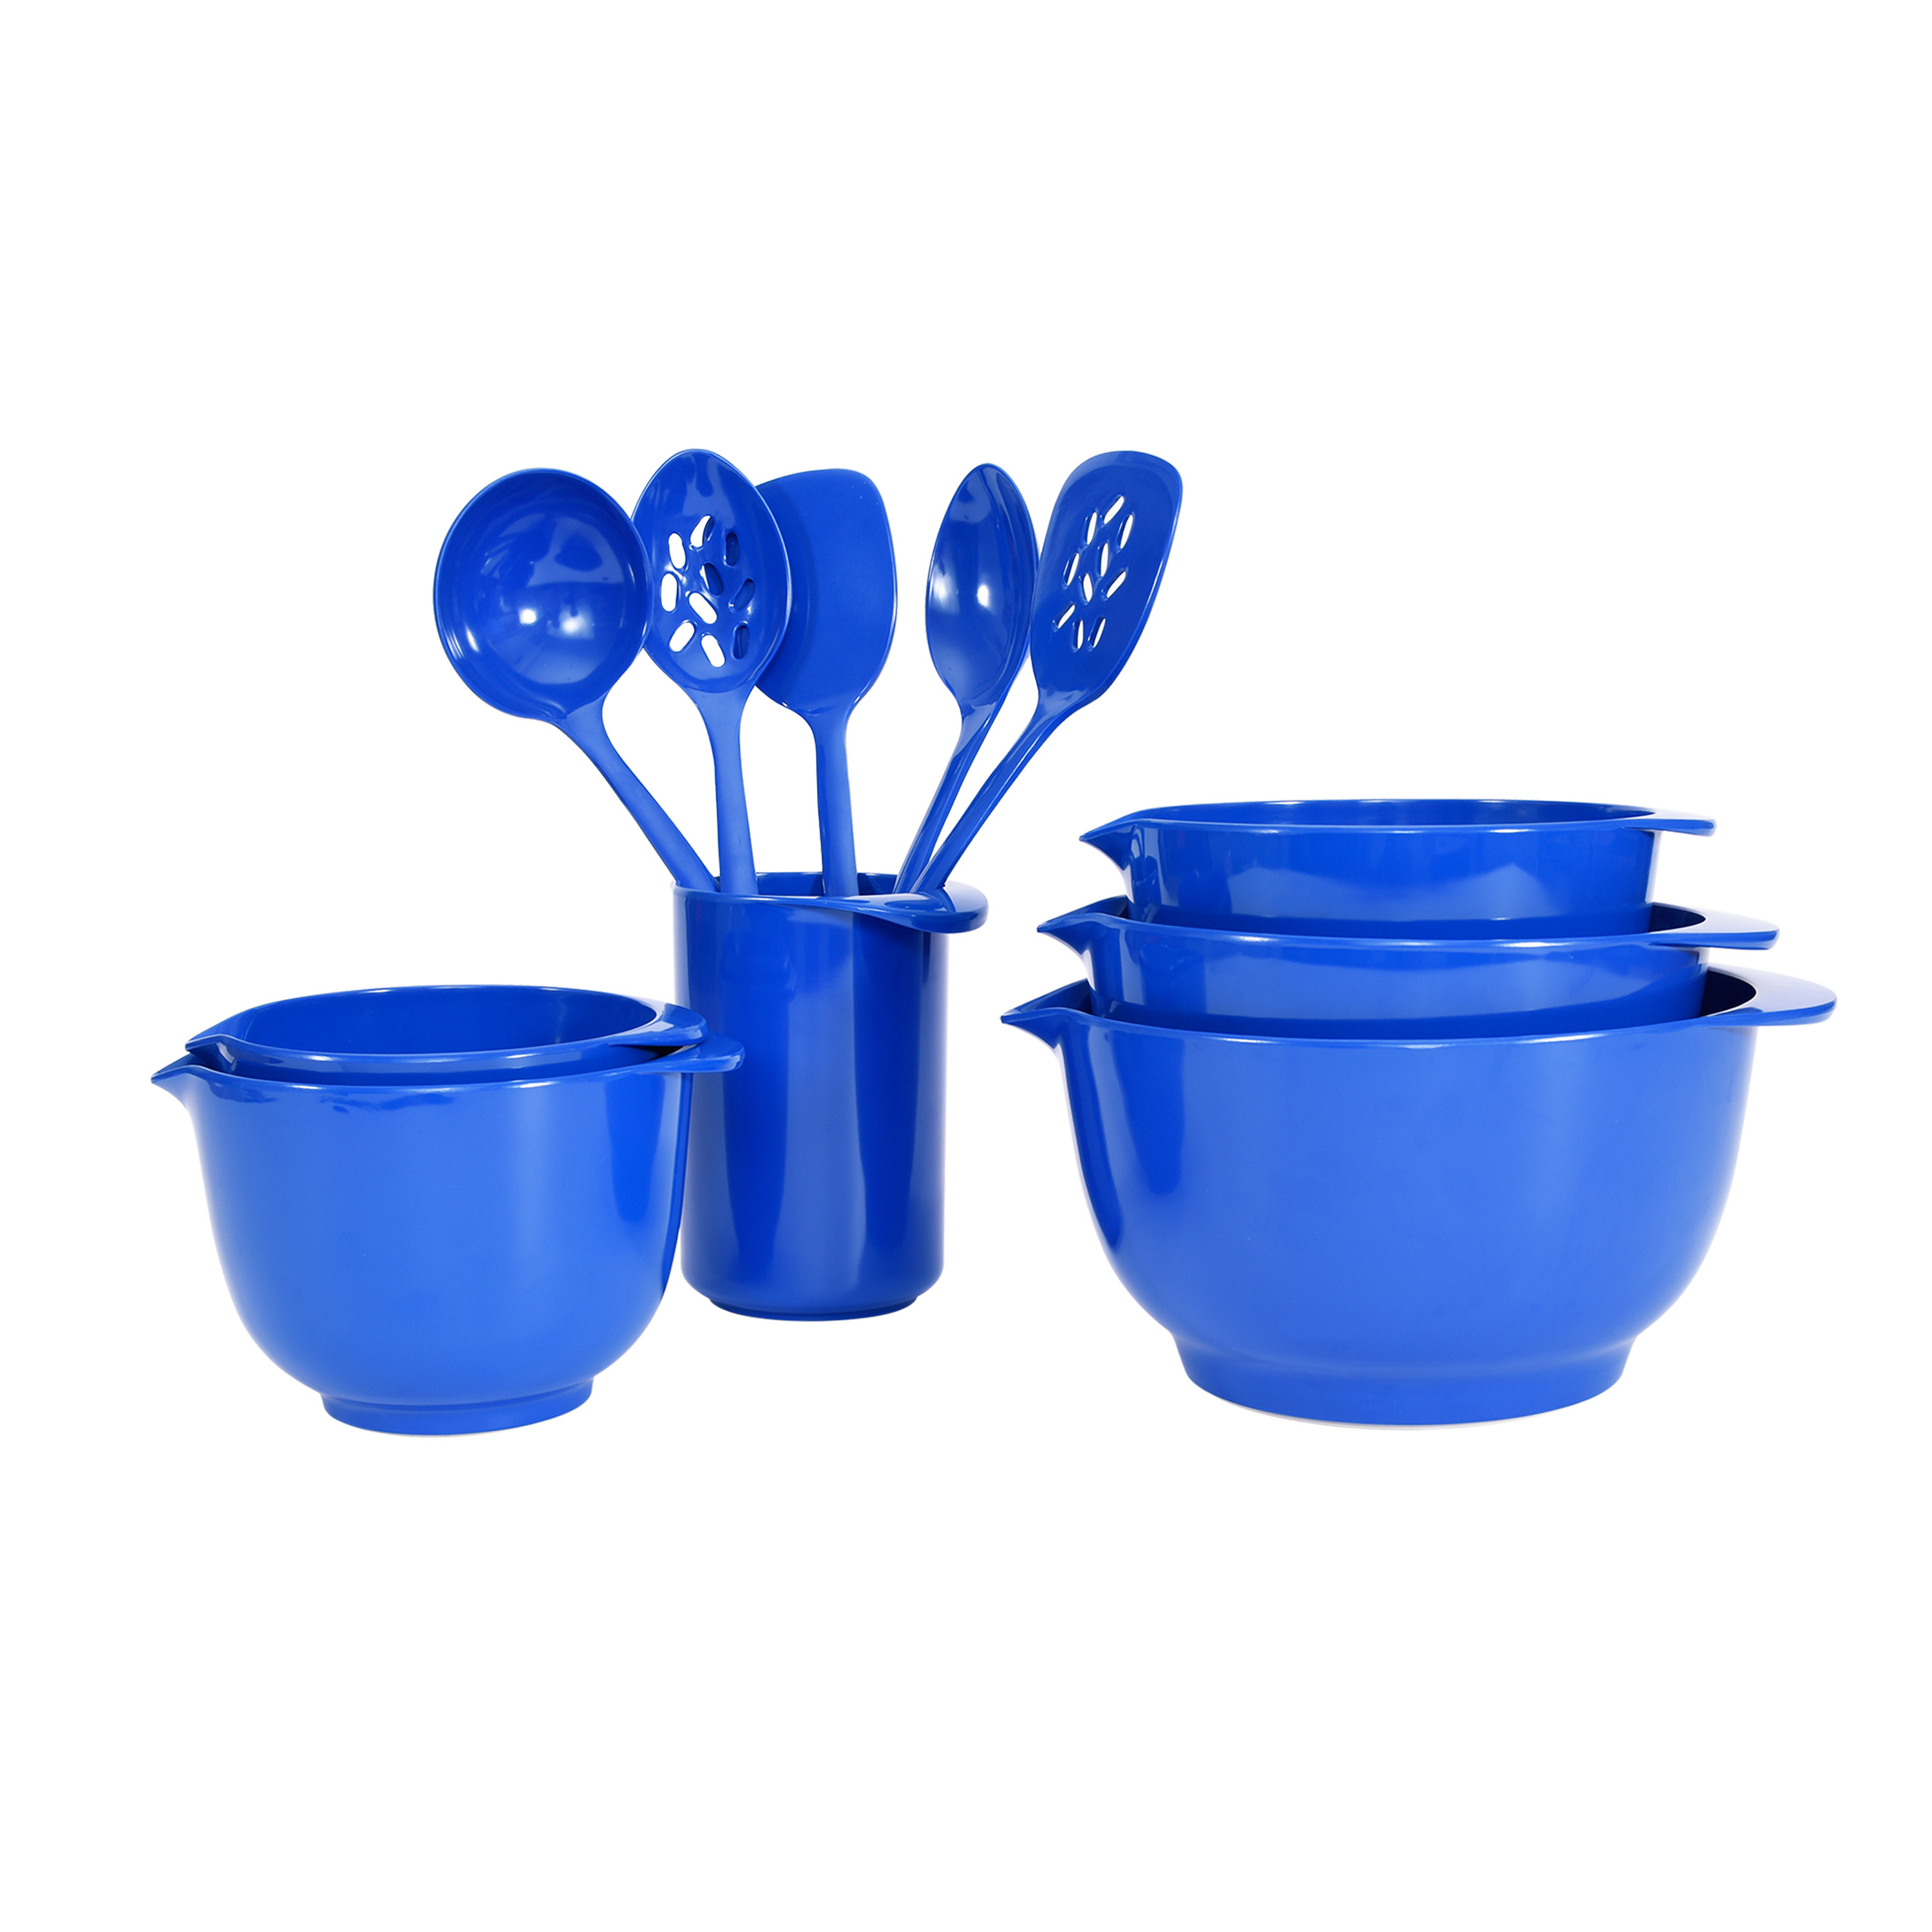 Discontinued - Last Chance Clearance! Mainstays 11PC Melamine Mixing Bowl and Utensil Set- Blue - image 1 of 4